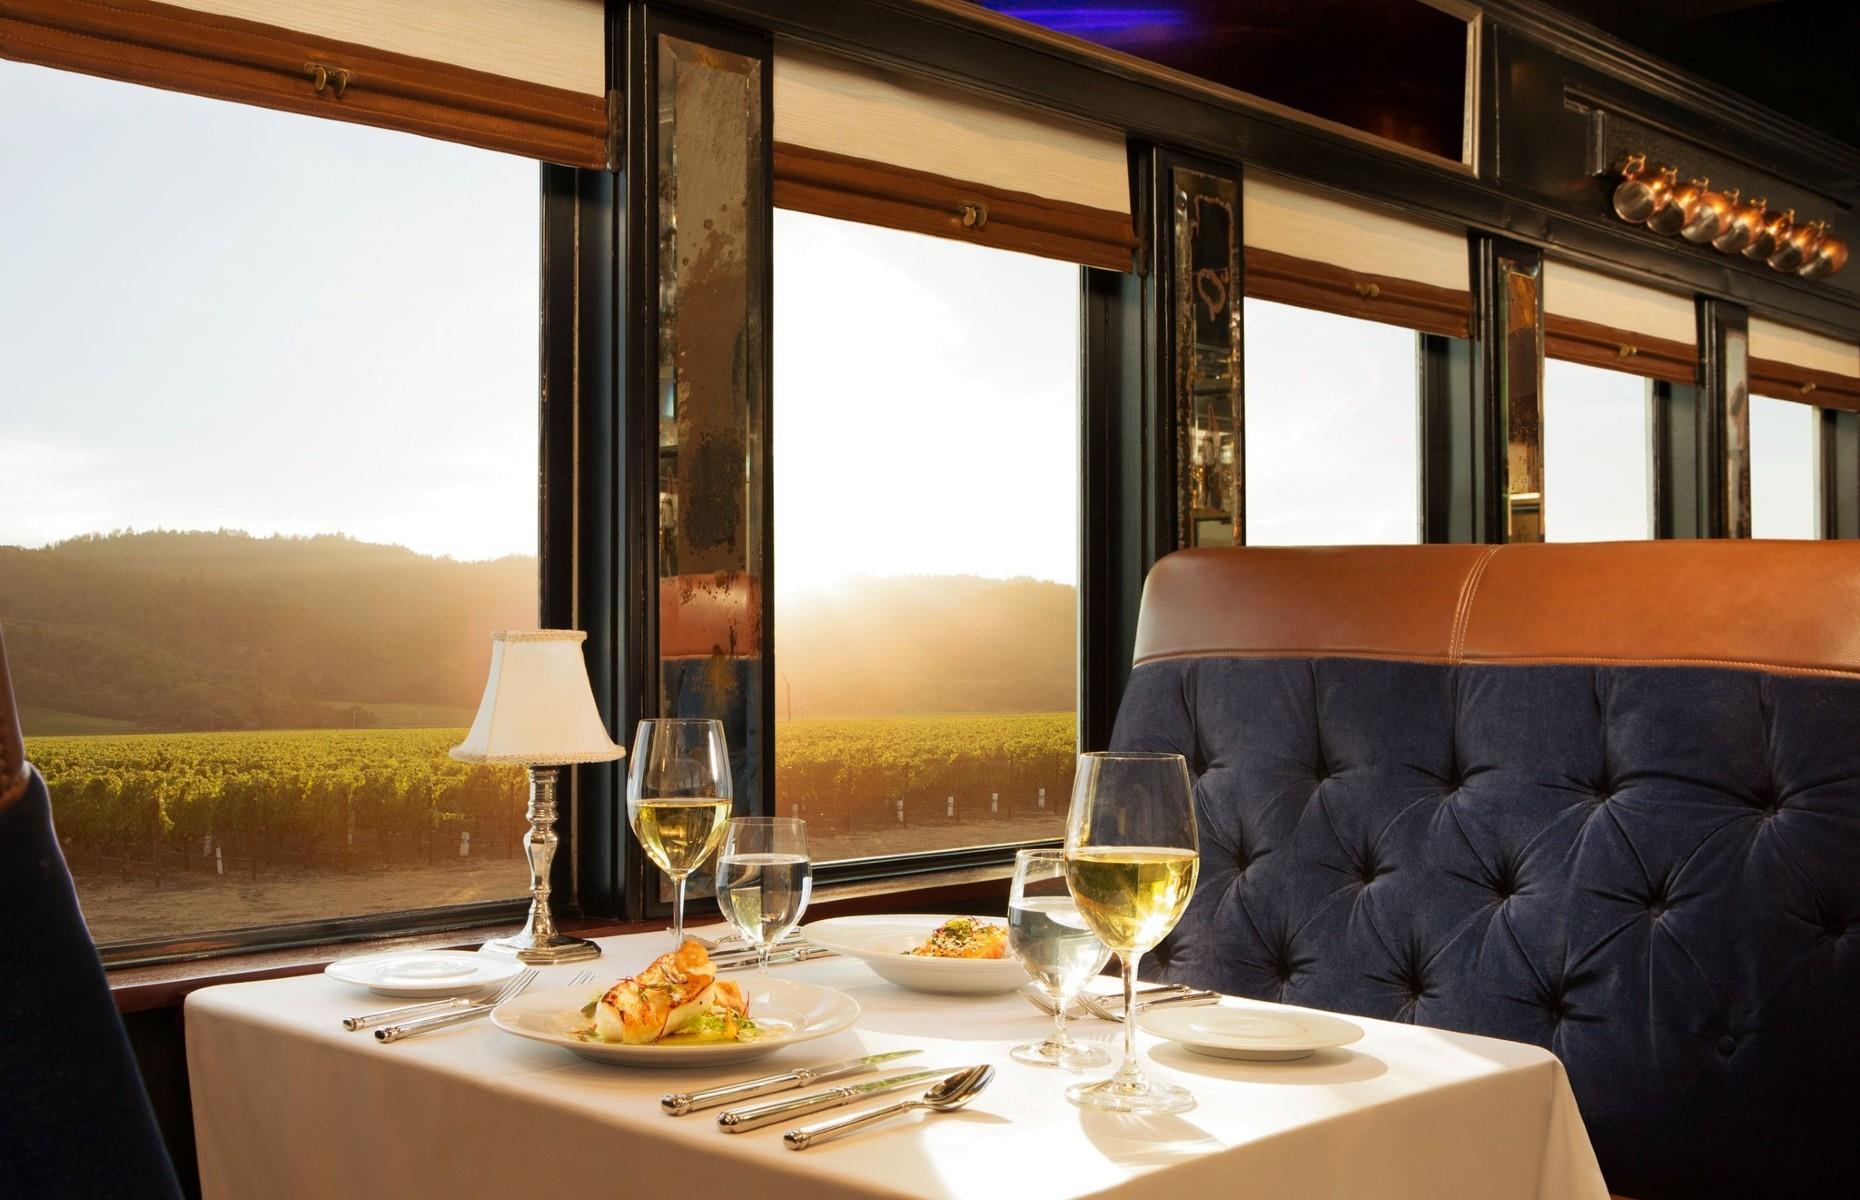 <p>Love wine? Love train travel? Then you’ll really love the <a href="https://www.winetrain.com/">Napa Valley Wine Train</a>, a luxurious journey between downtown Napa to St Helena. The train’s vintage carriages have been sensitively restored to evoke the glamour of vintage train travel, with velvet seats, mahogany paneling and brass, while the landscapes you’ll glide past are nothing short of spectacular. There are a range of packages to choose from, from half-day tours with tastings to onboard dining experiences and special events. </p>